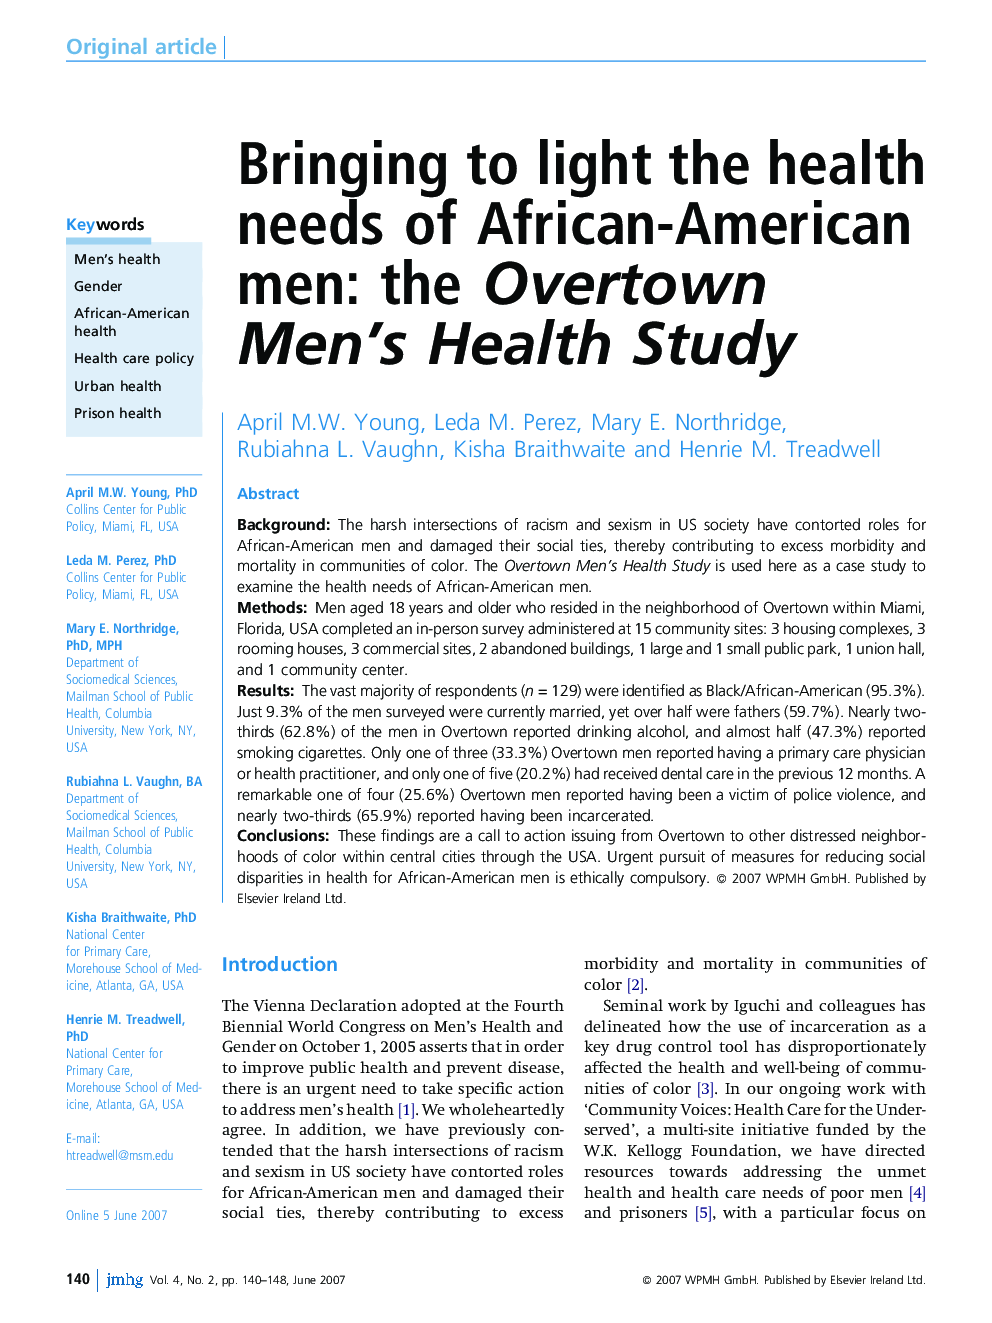 Bringing to light the health needs of African-American men: the Overtown Men's Health Study